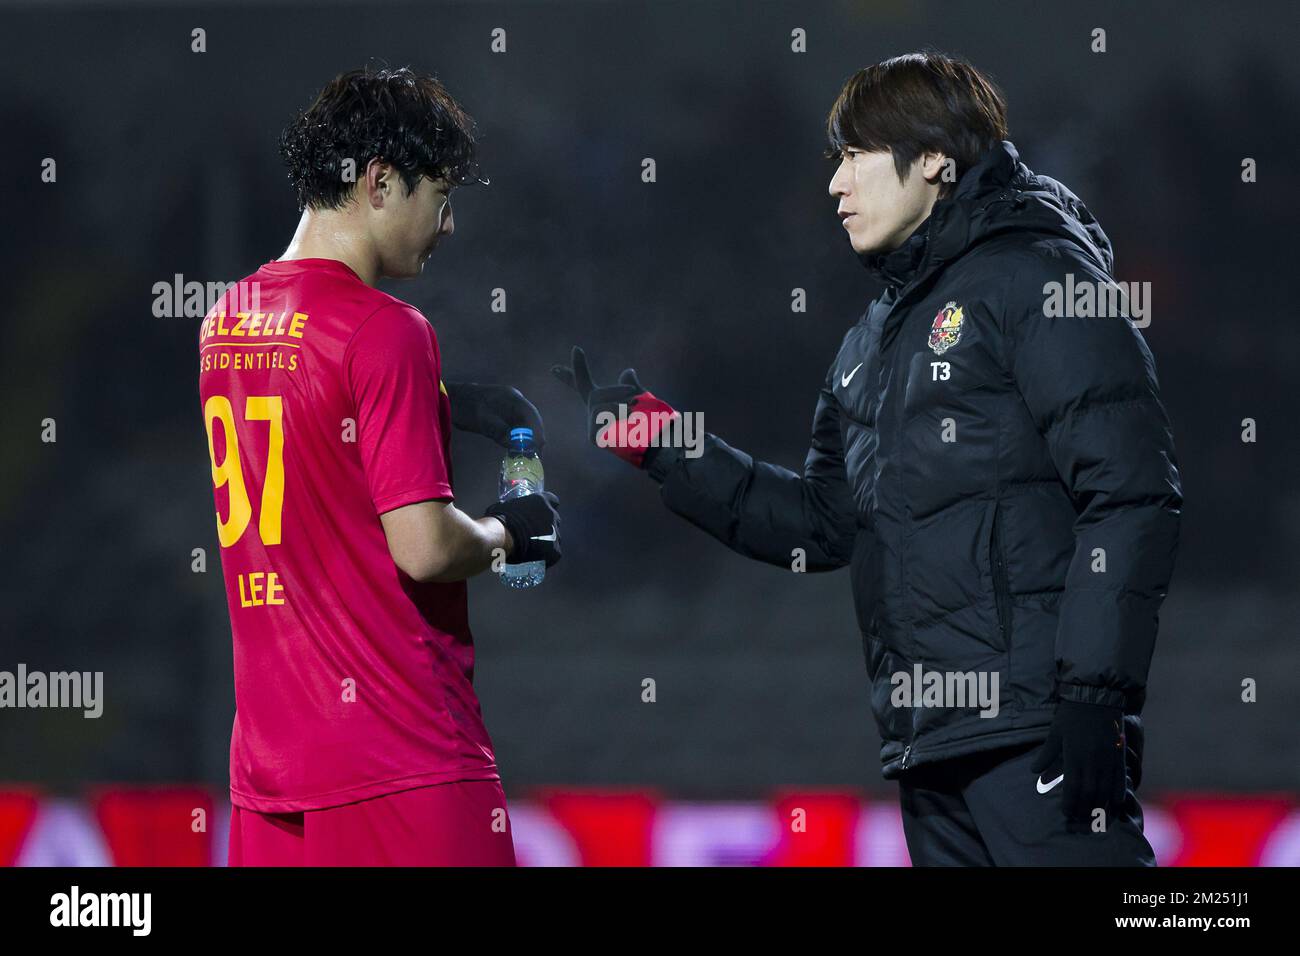 Tubize's Jae Gun Lee and Tubize's assistant coach Eun Jung Kim pictured during the Proximus League match of D1B between Lierse SK and AFC Tubize, in Lier, Saturday 04 February 2017, on day 25 of the Belgian soccer championship, division 1B. BELGA PHOTO KRISTOF VAN ACCOM Stock Photo